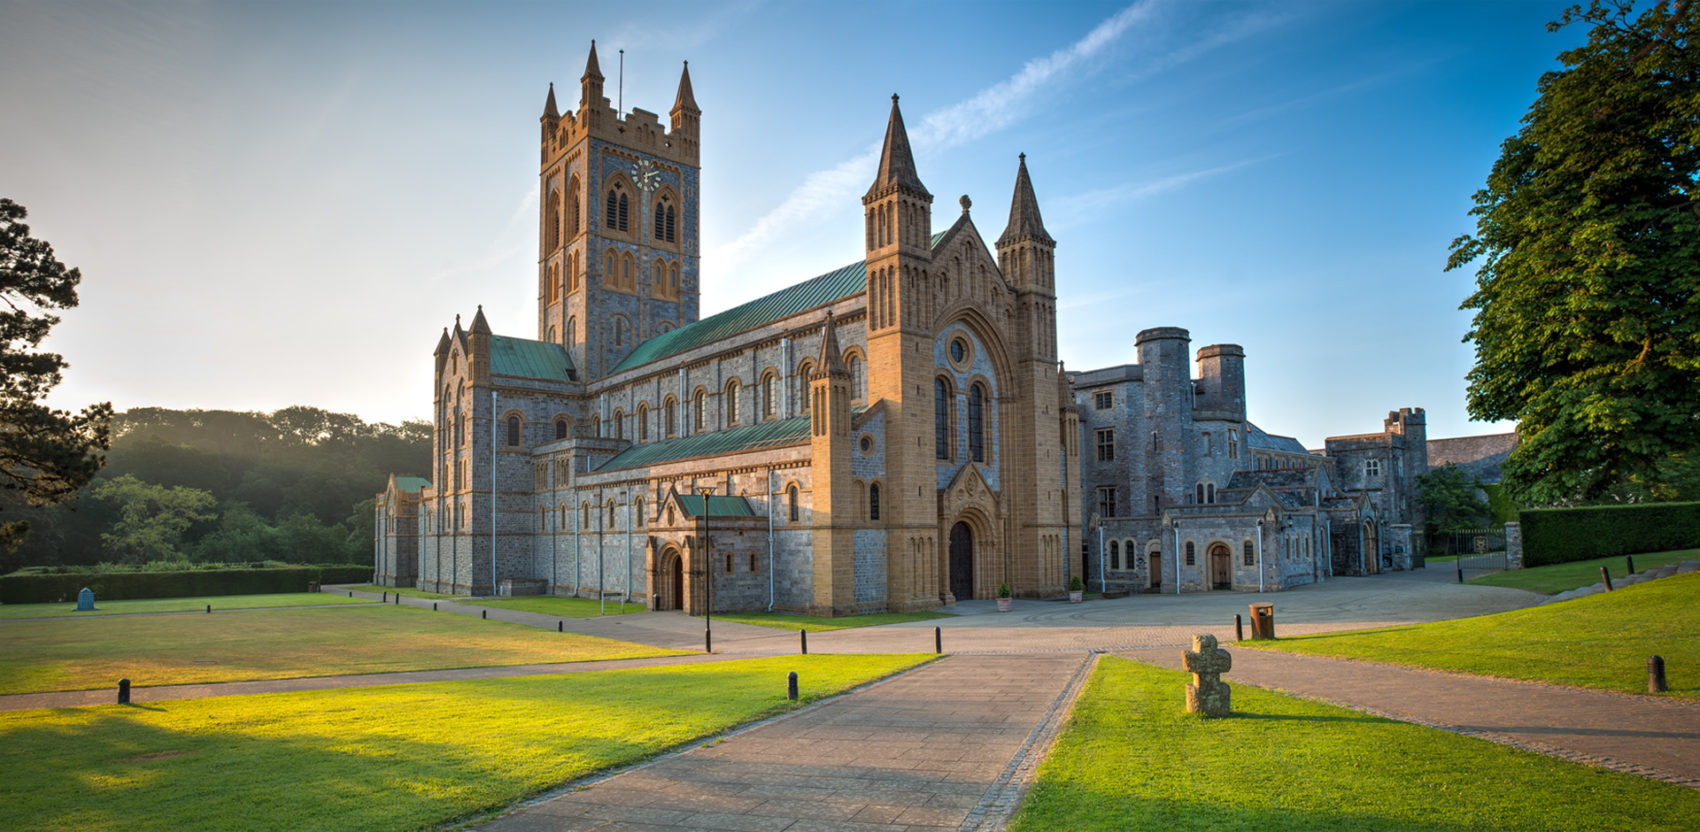 Buckfast abbey, Dartmoor, local, church, cathedral, Holy, monks